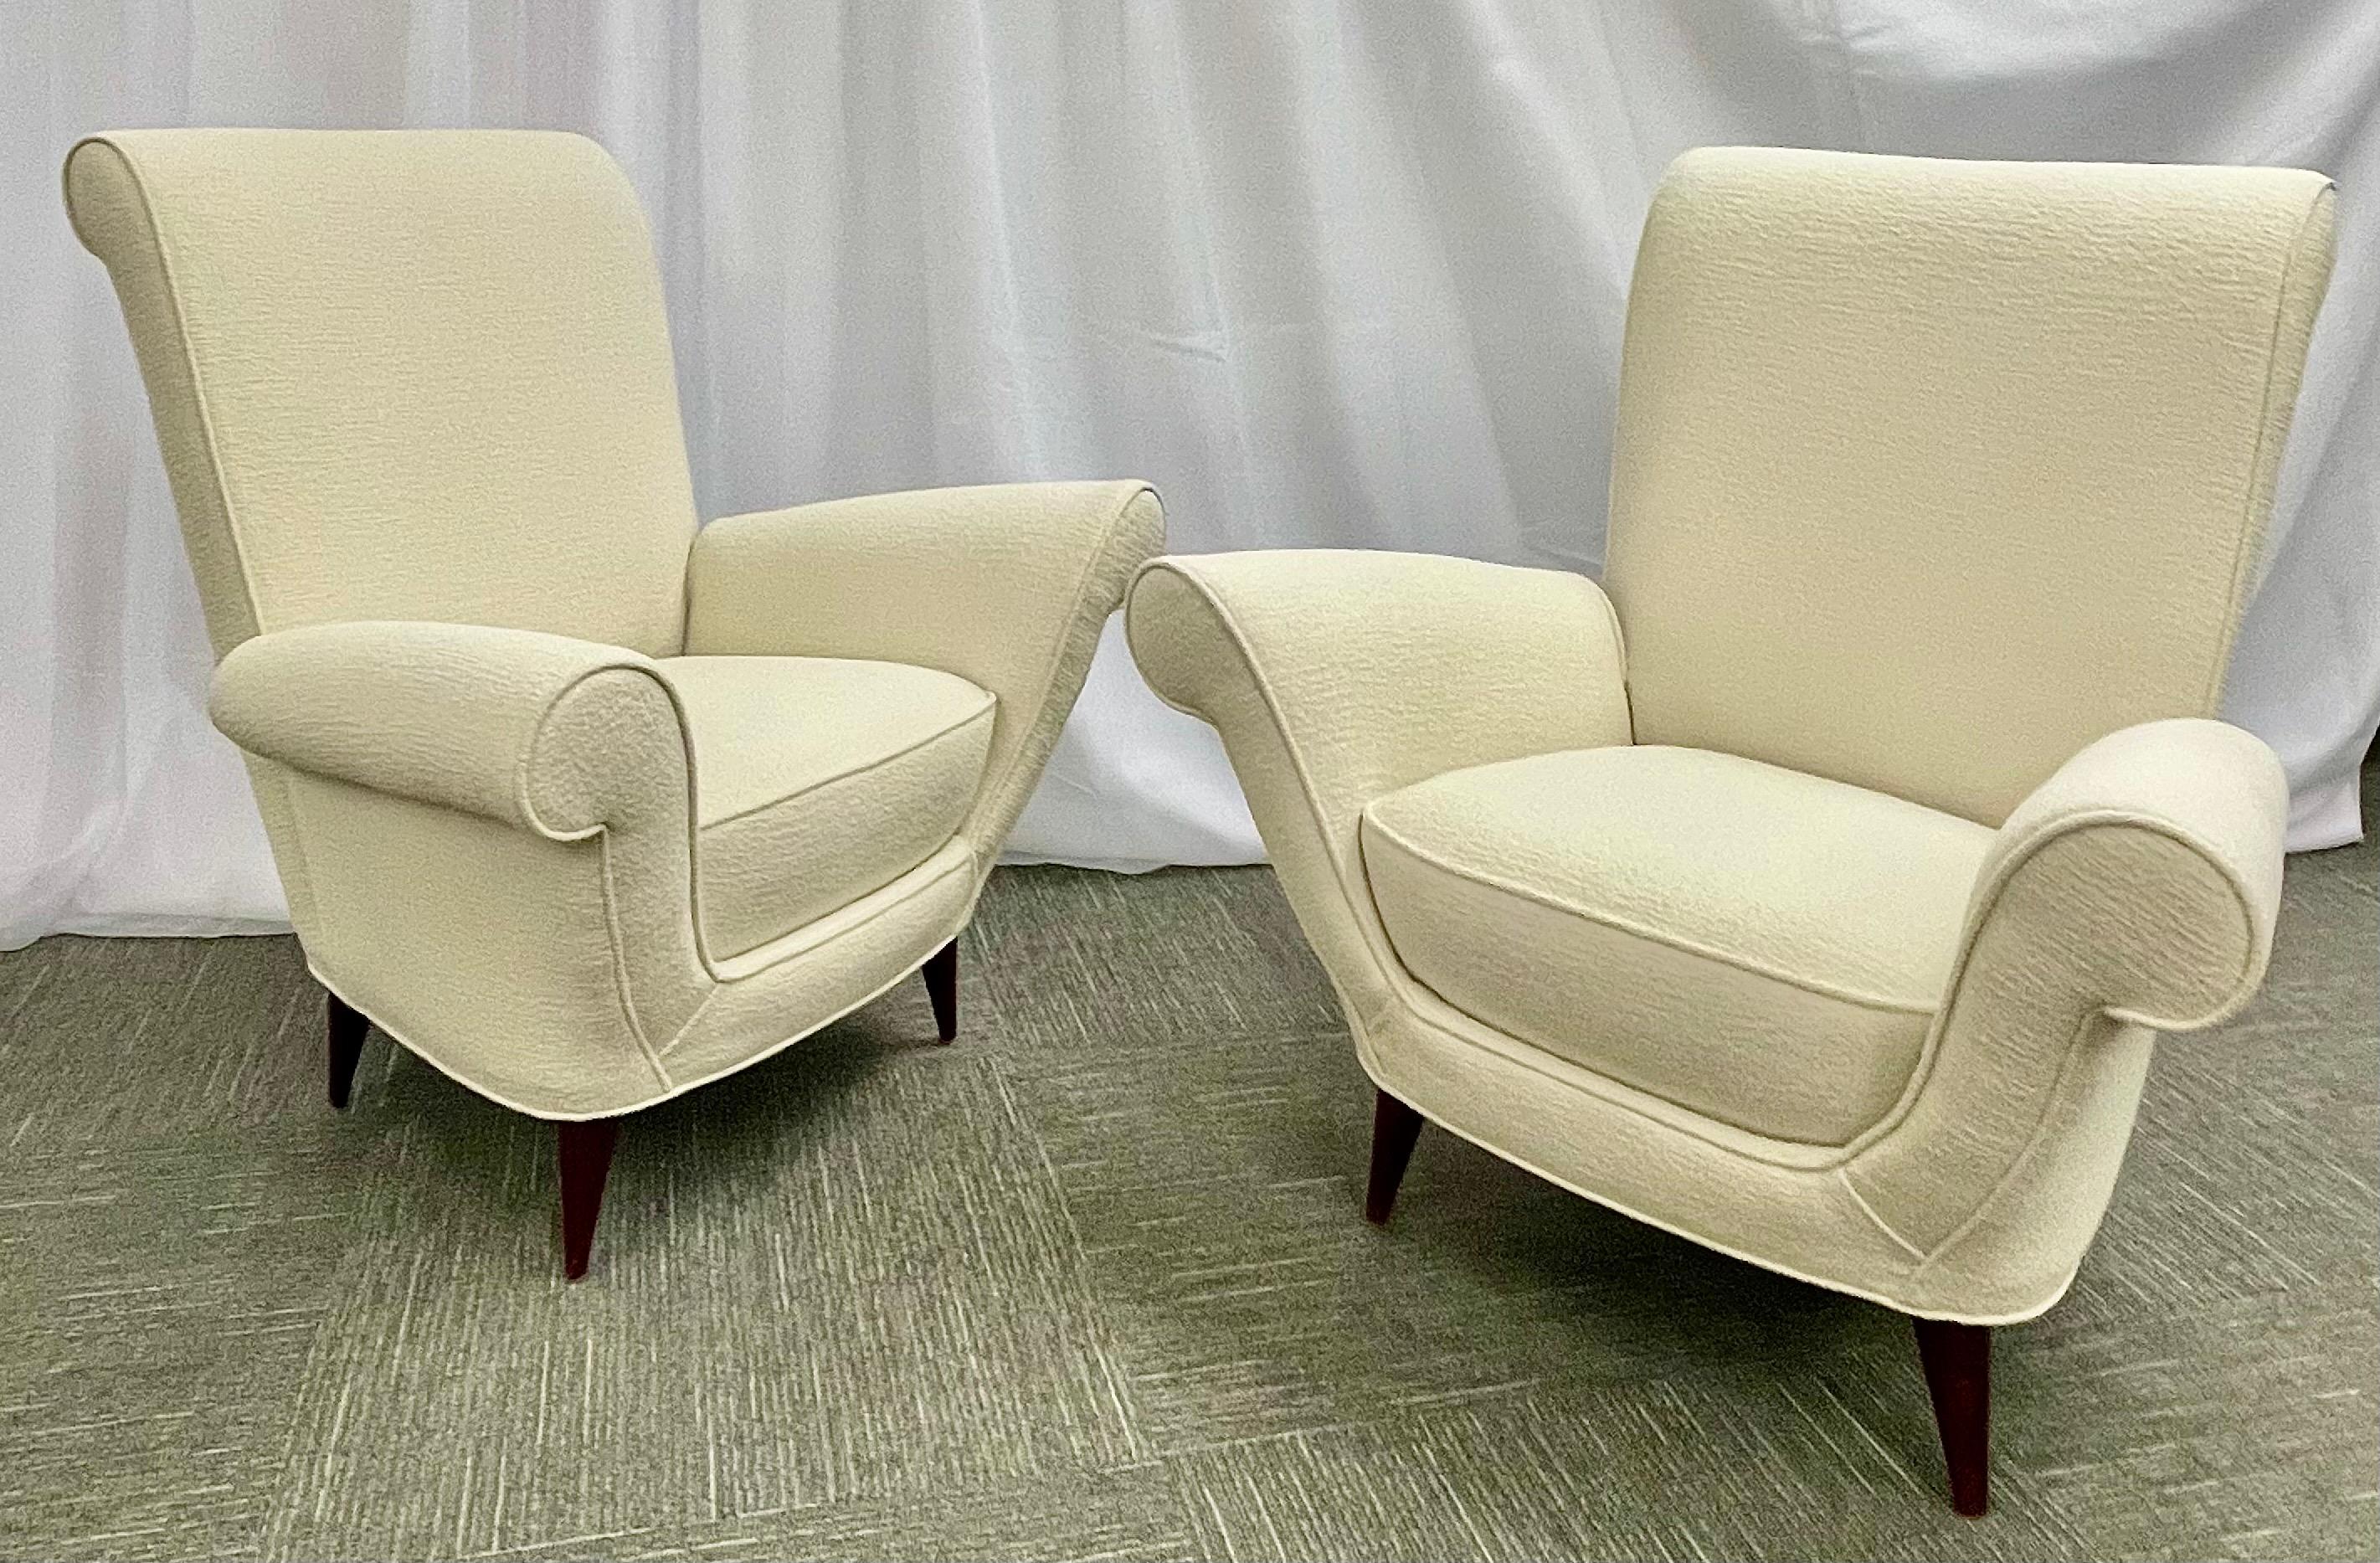 20th Century Paola Buffa Style, Mid-Century Modern, Lounge Chairs, White Bouclé, Italy, 1960s For Sale